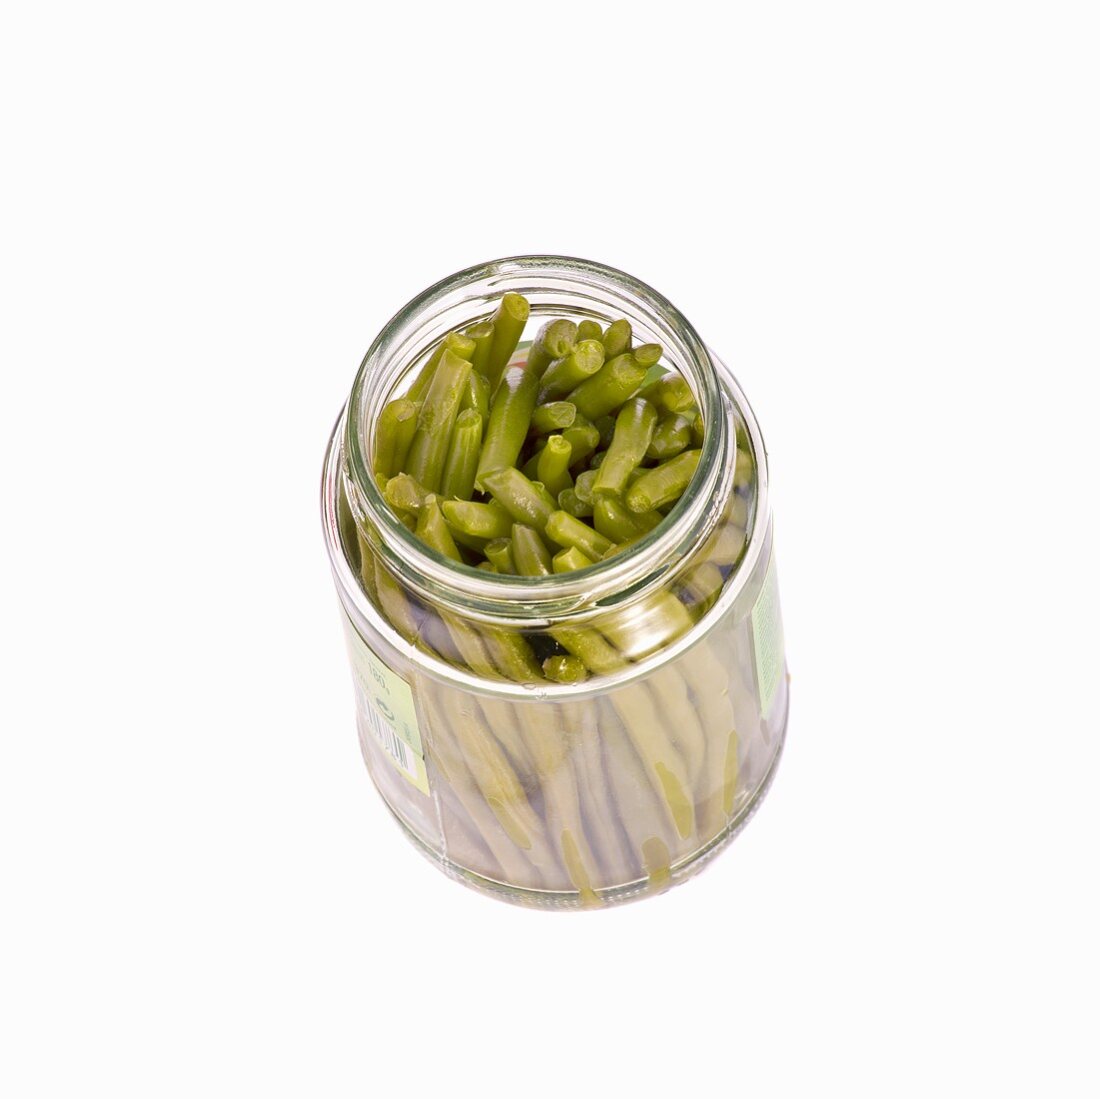 A jar of French beans